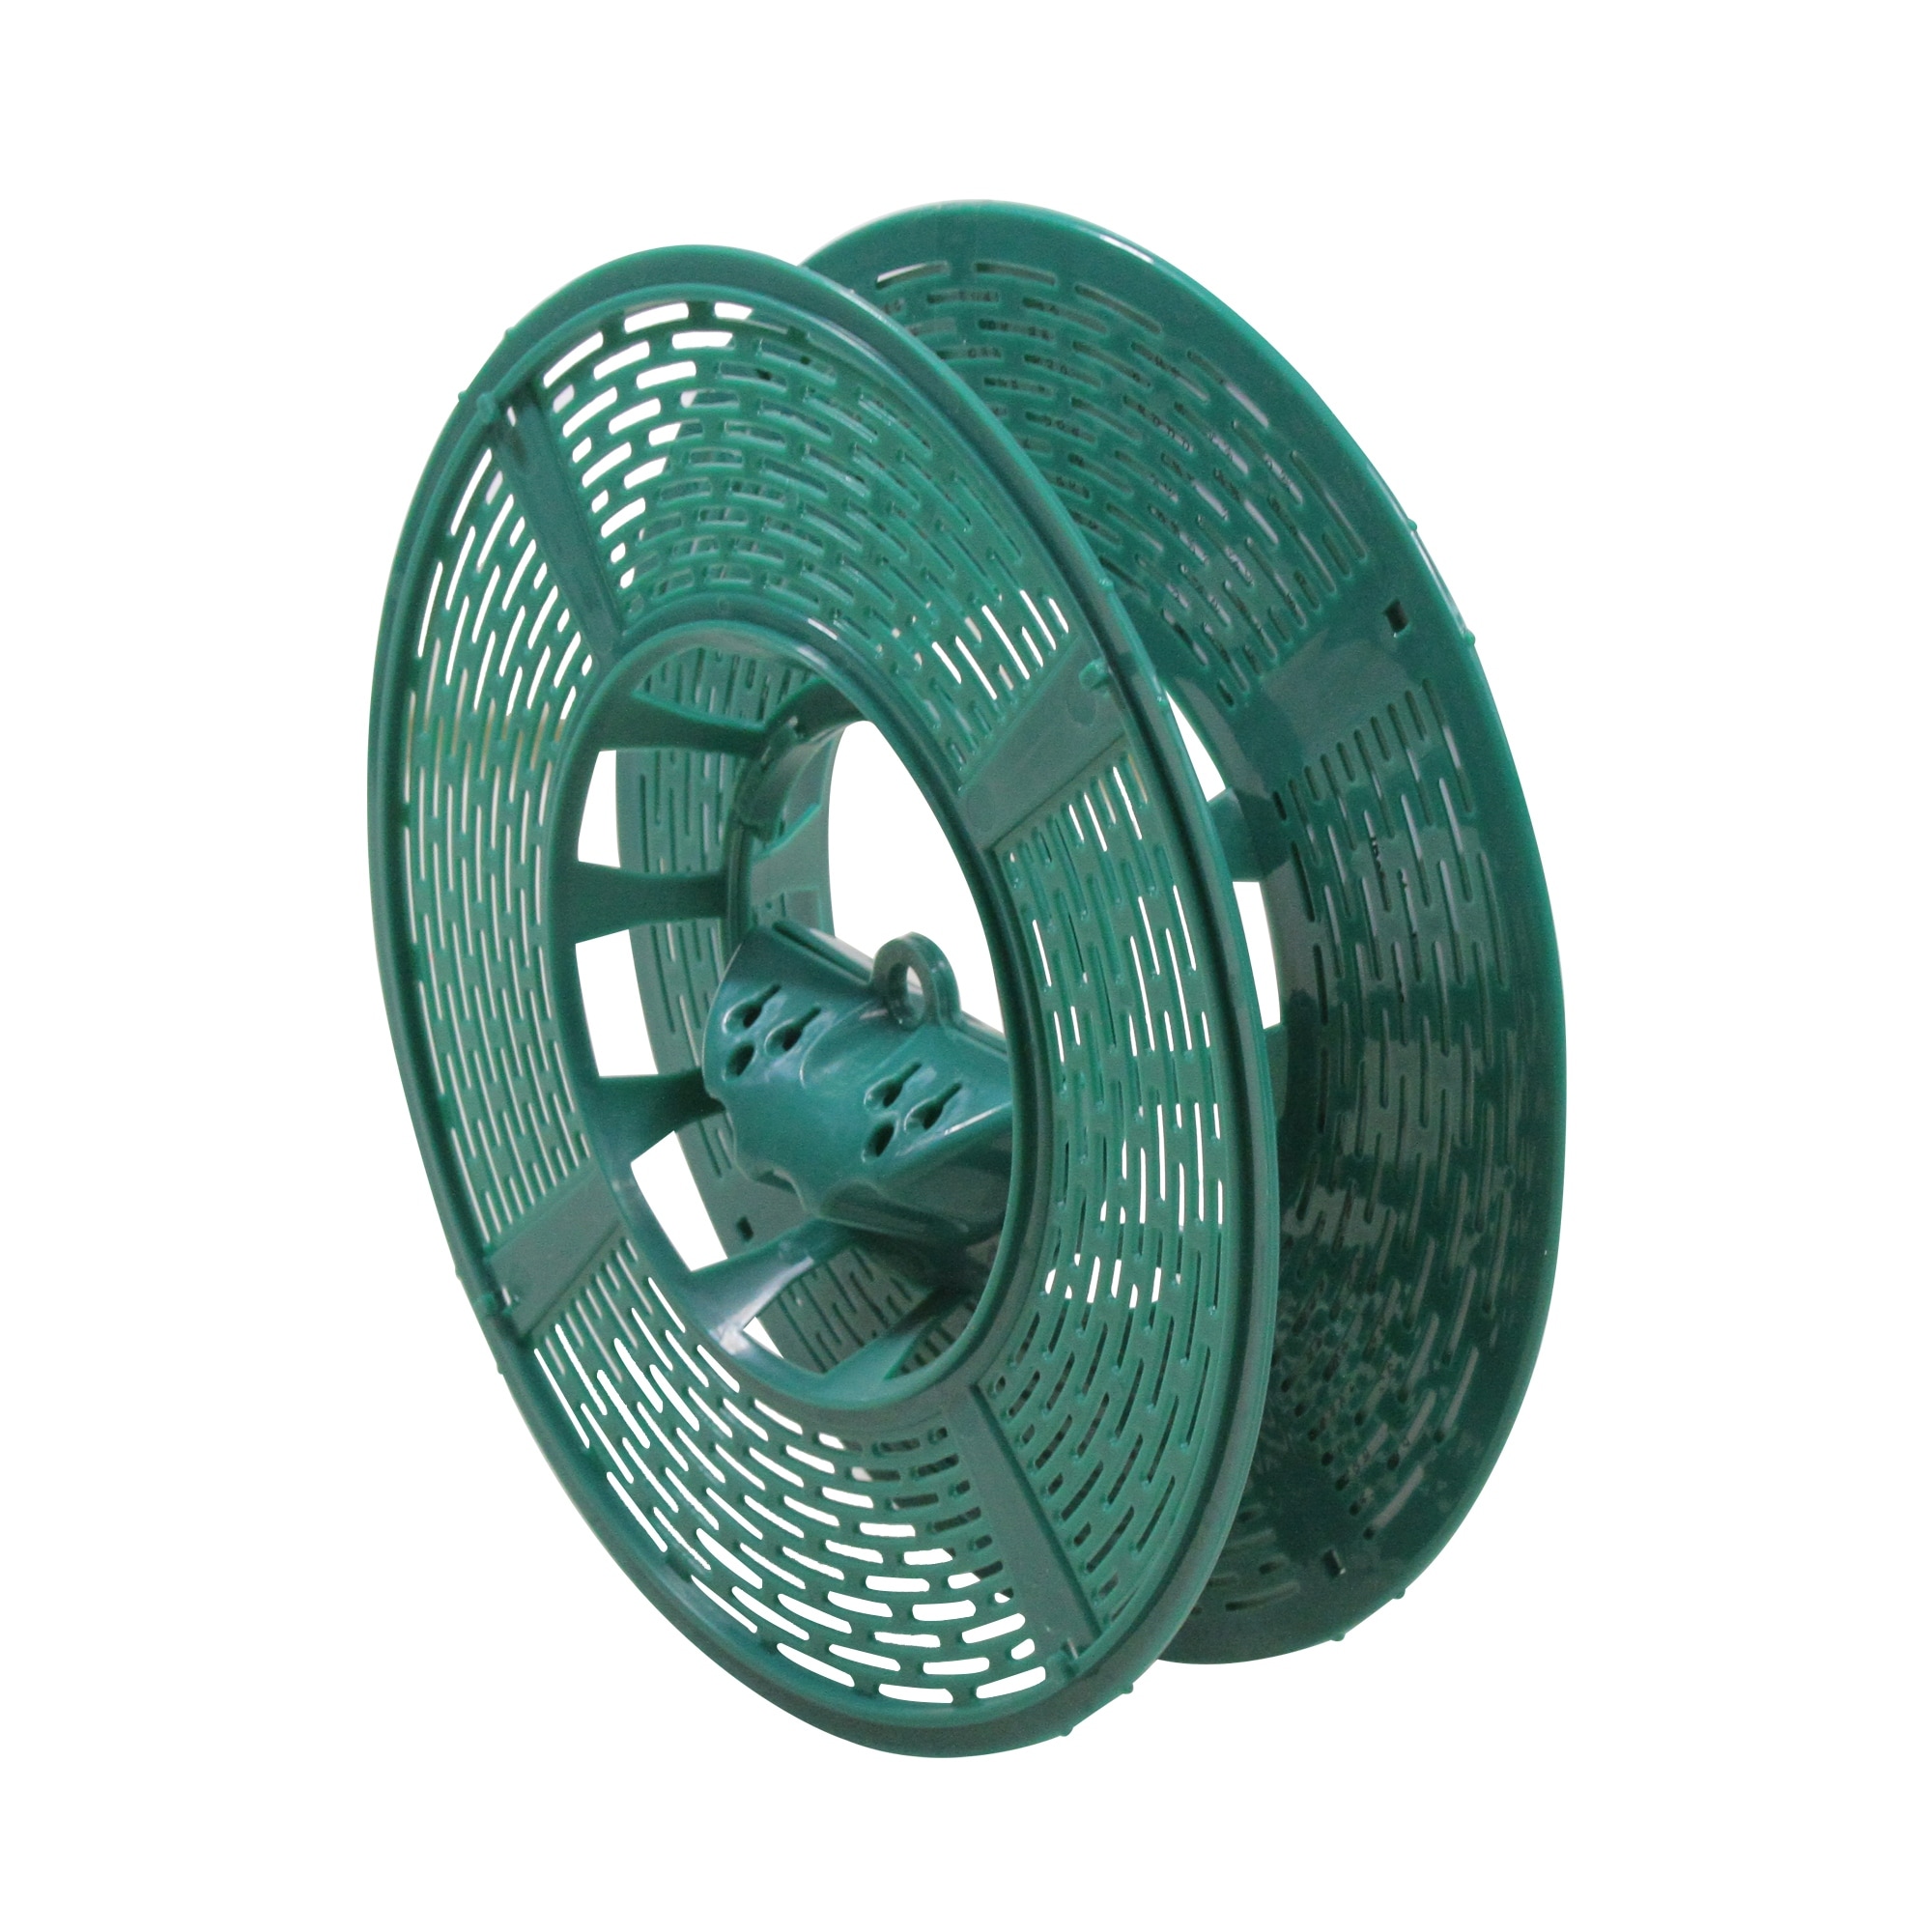 https://ak1.ostkcdn.com/images/products/is/images/direct/f2f8409d4d0490f2f51e0c3a9ea515014b74a3cd/Large-Green-Christmas-Light-Storage-Reel-with-Center-Handle.jpg